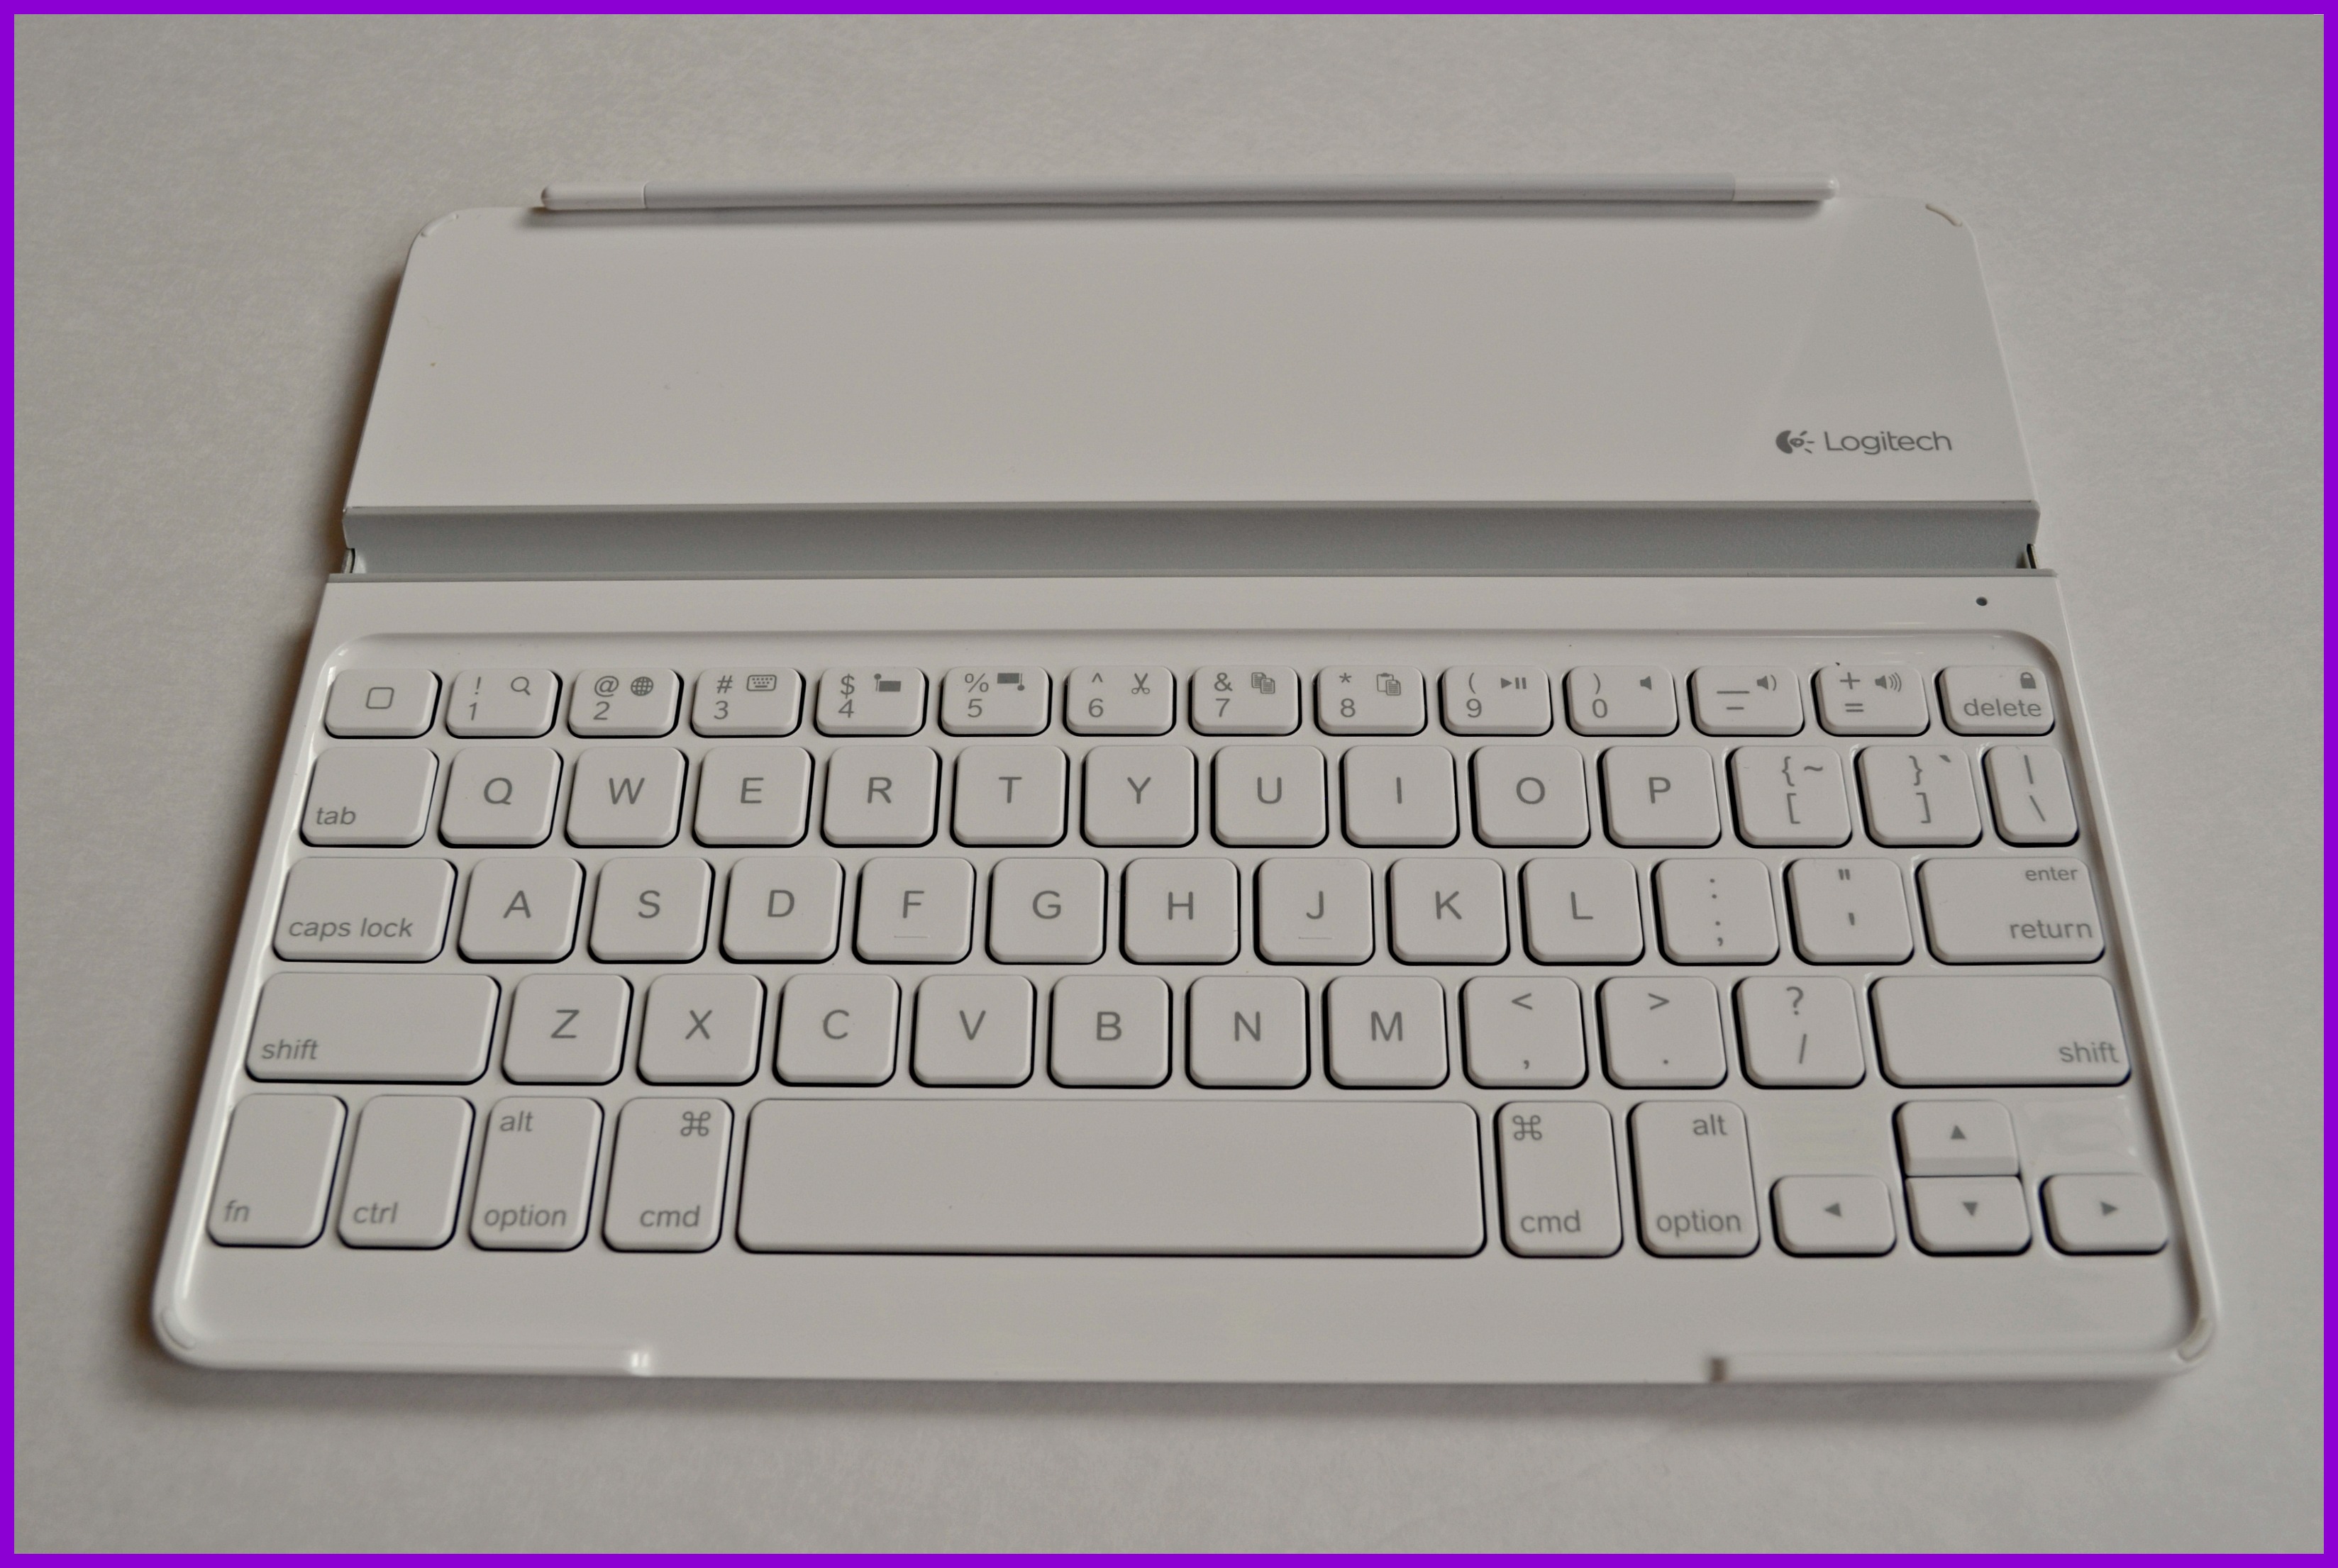 Logitech Ultrathin Keyboard Cover For iPad Review